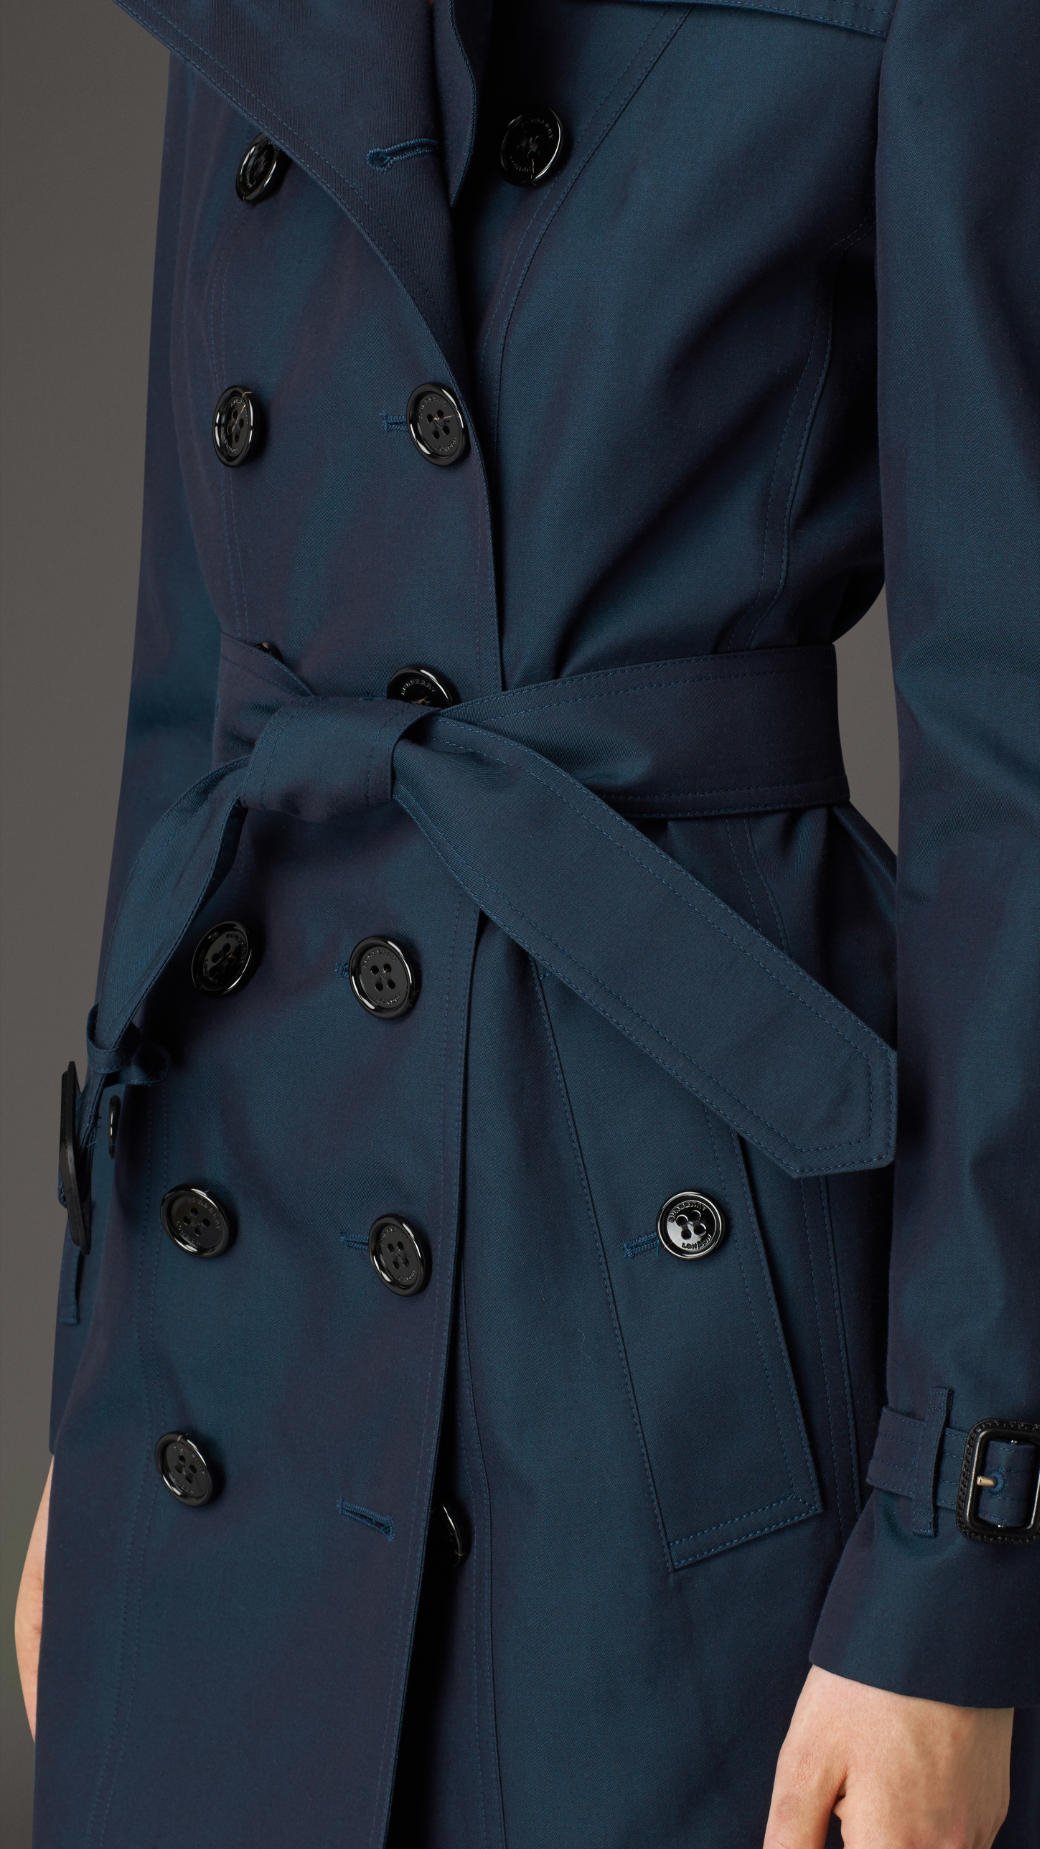 burberry blue trench coat Online Shopping for Women, Men, Kids Fashion &  Lifestyle|Free Delivery & Returns! -